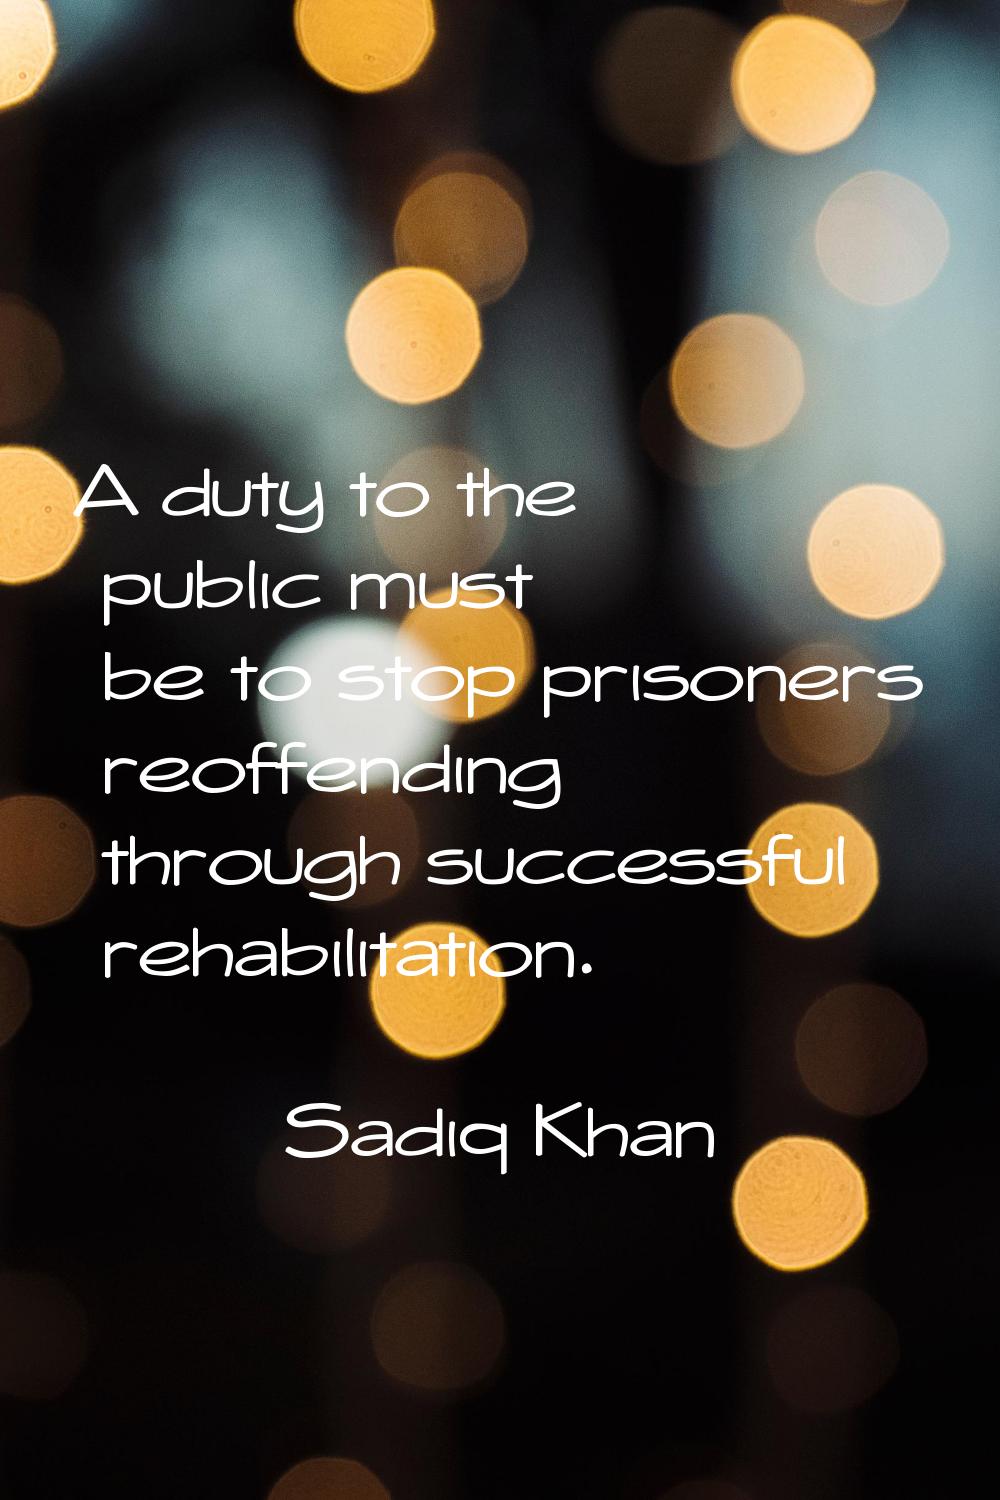 A duty to the public must be to stop prisoners reoffending through successful rehabilitation.